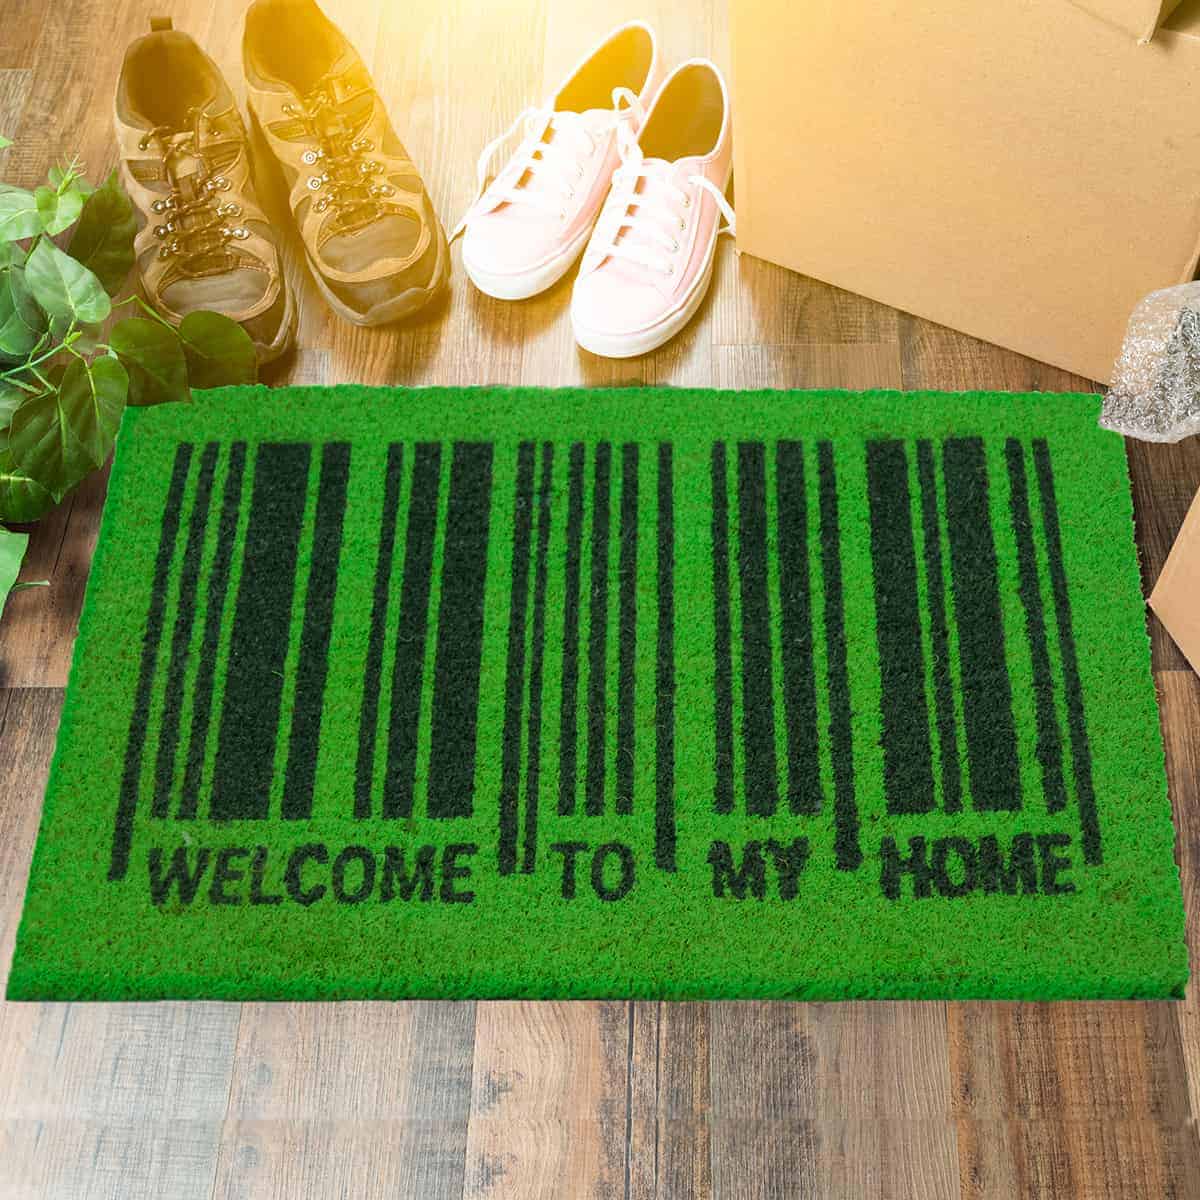 Sheltered Printed Front Door Mat Welcome To My Home Barcode Coir Coco Fibers Rug 24x16 Green Black